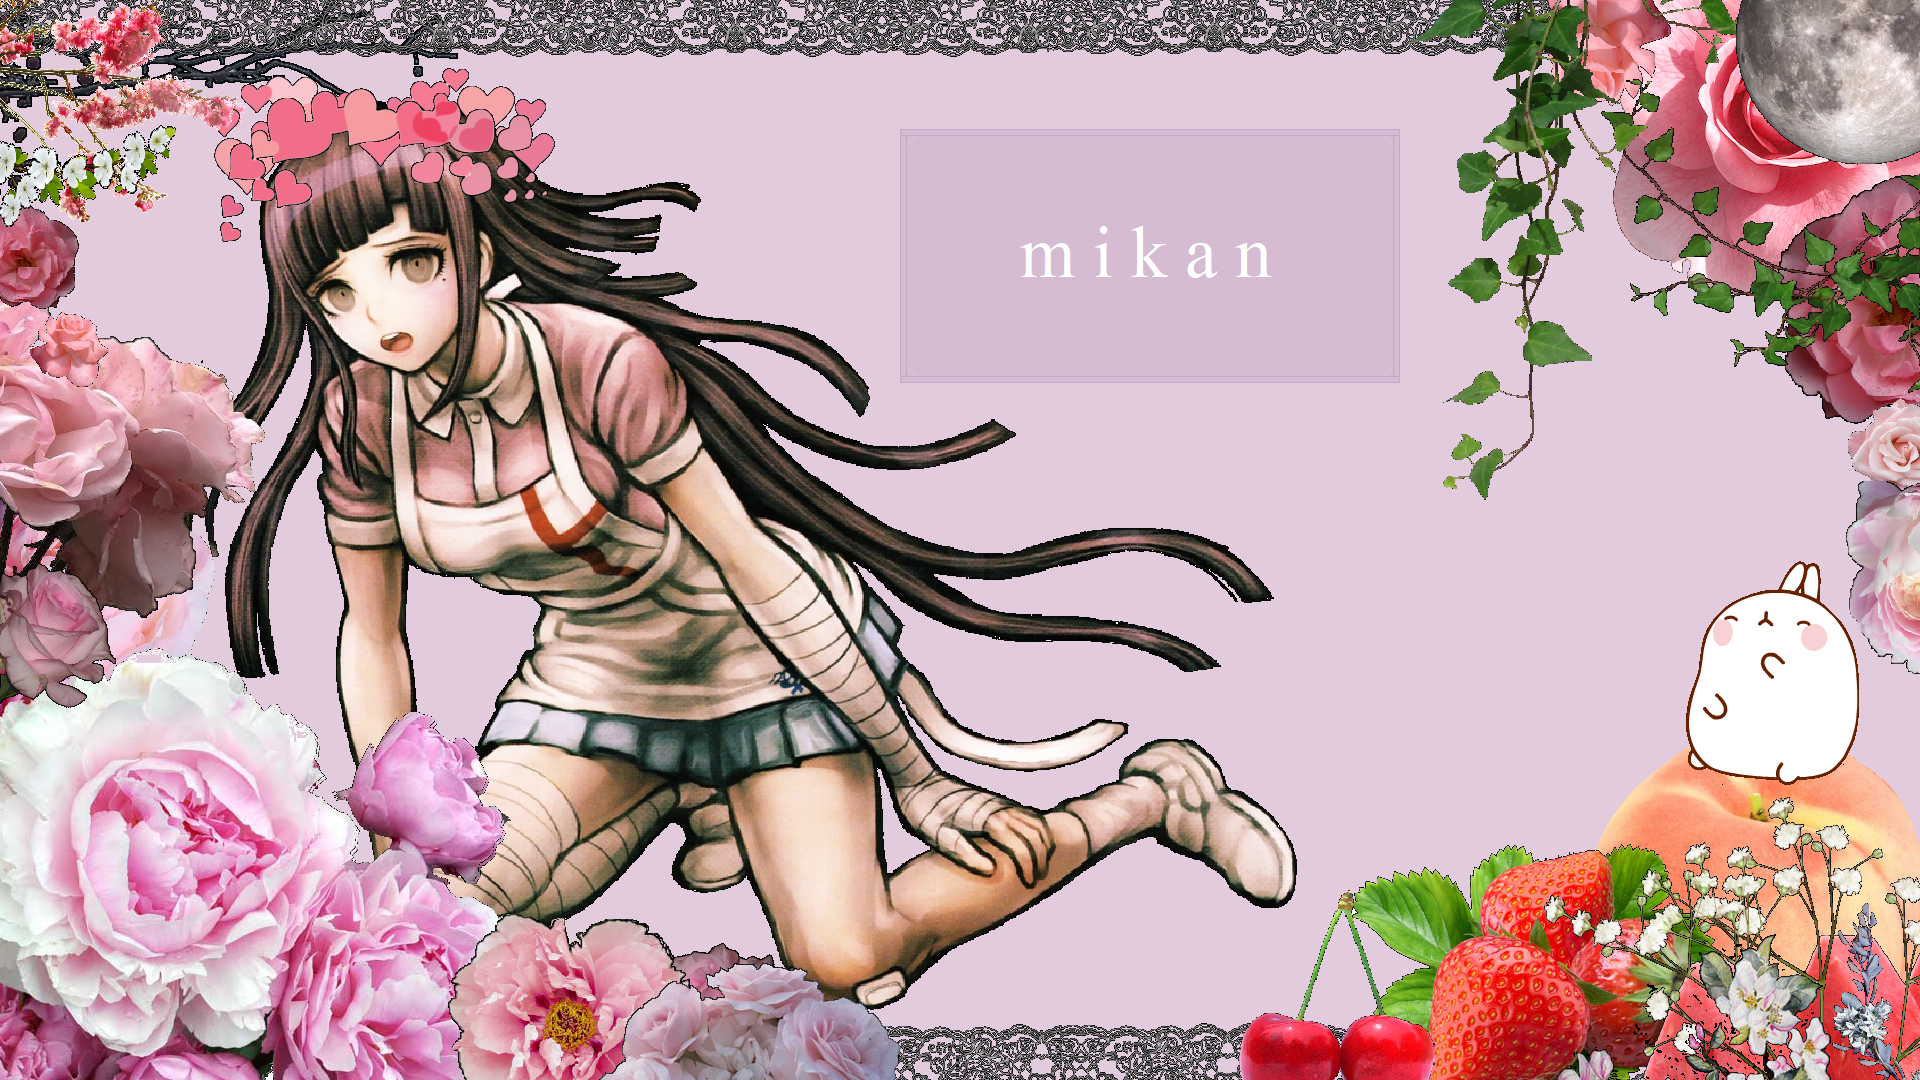 Mikan Tsumiki computer wallpaper for myself! I made it look better